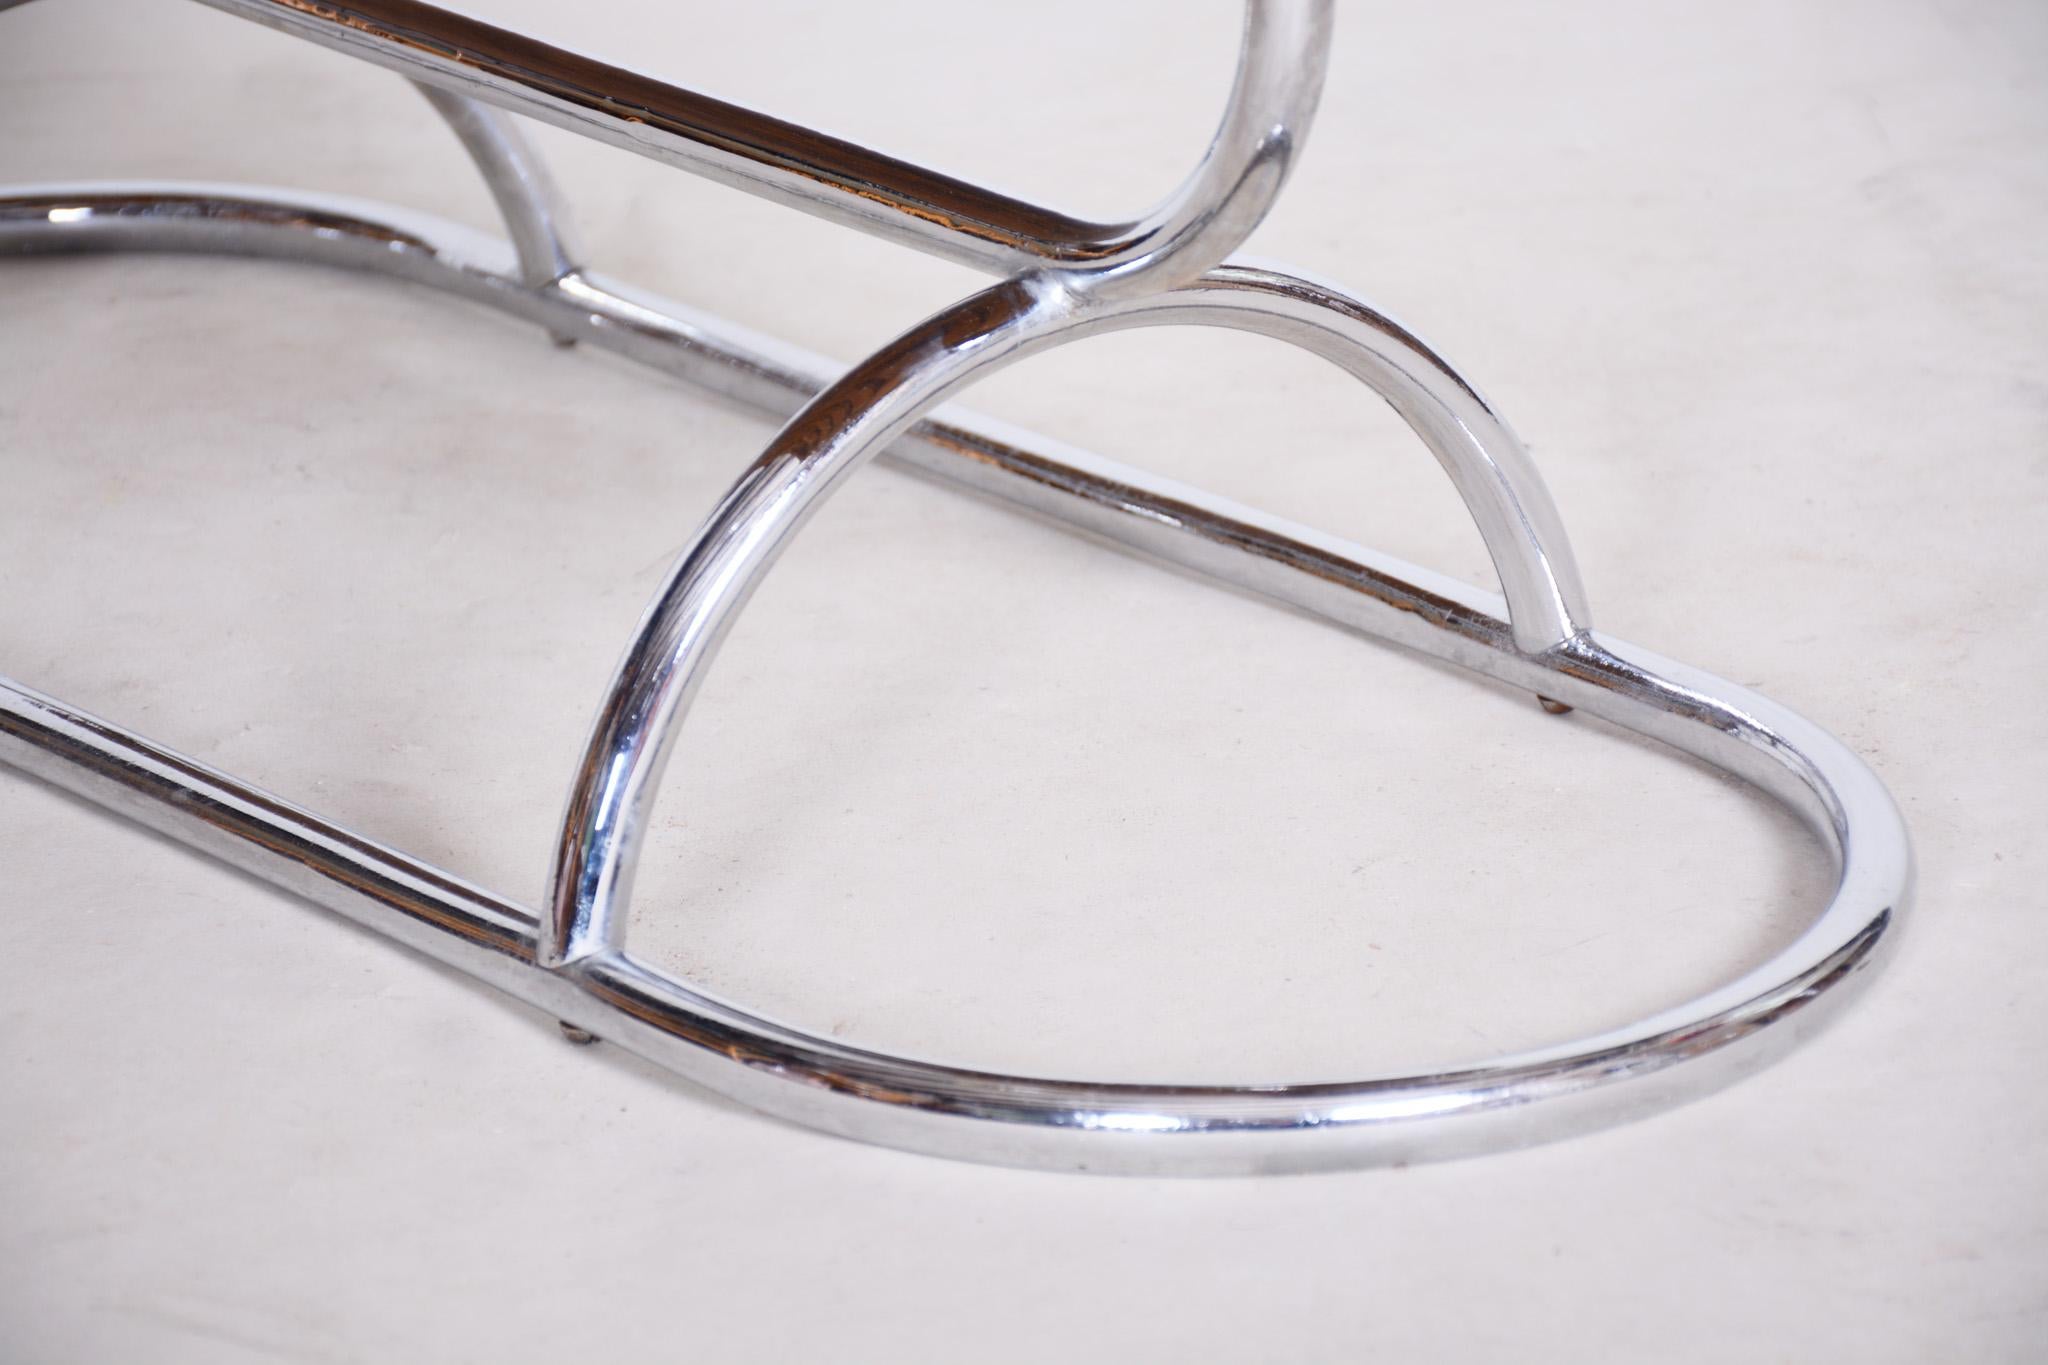 Czech Bauhaus Chrome Flower Stand Made Out of Oak, Lacquered, 1930s For Sale 1